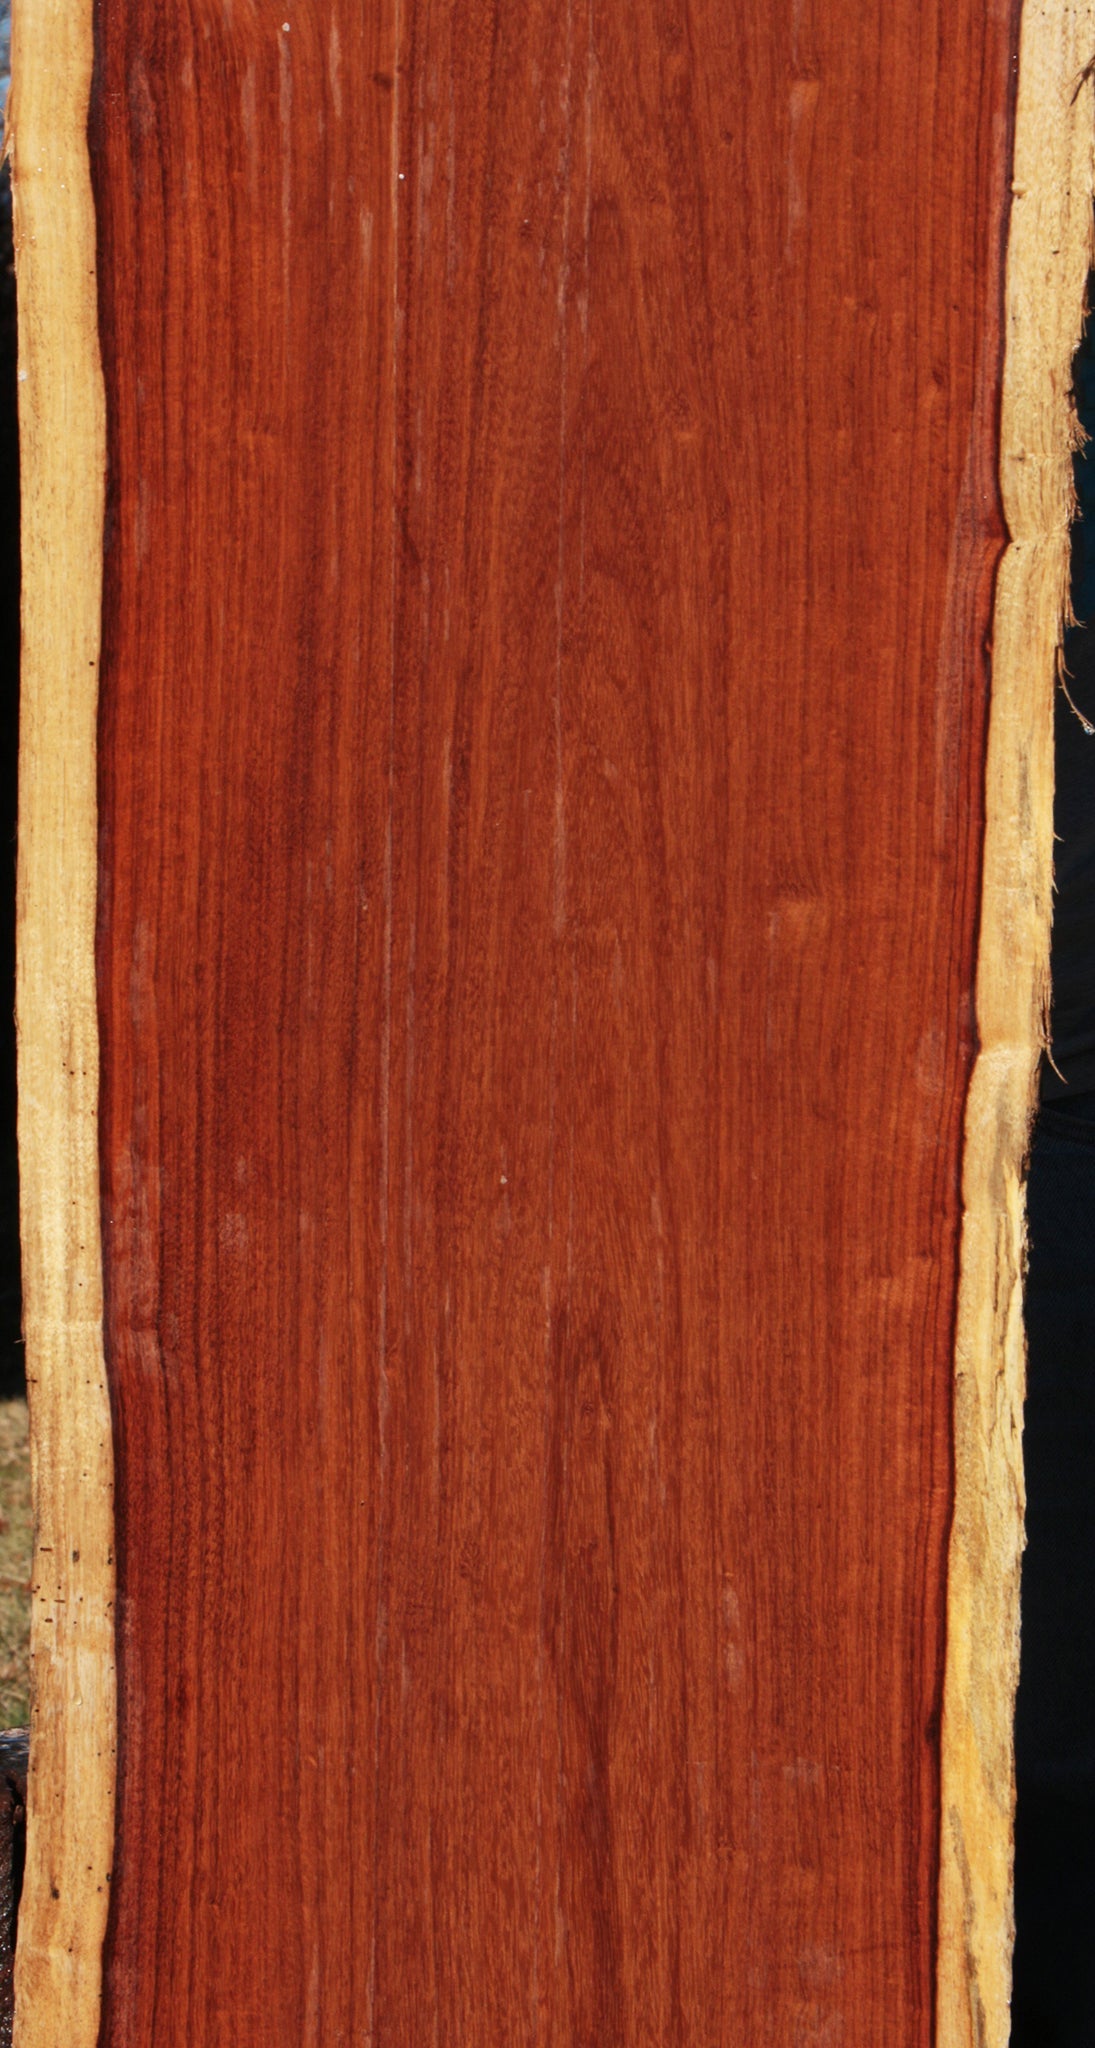 Granadillo Live Edge Lumber (Free Shipping Excluded)